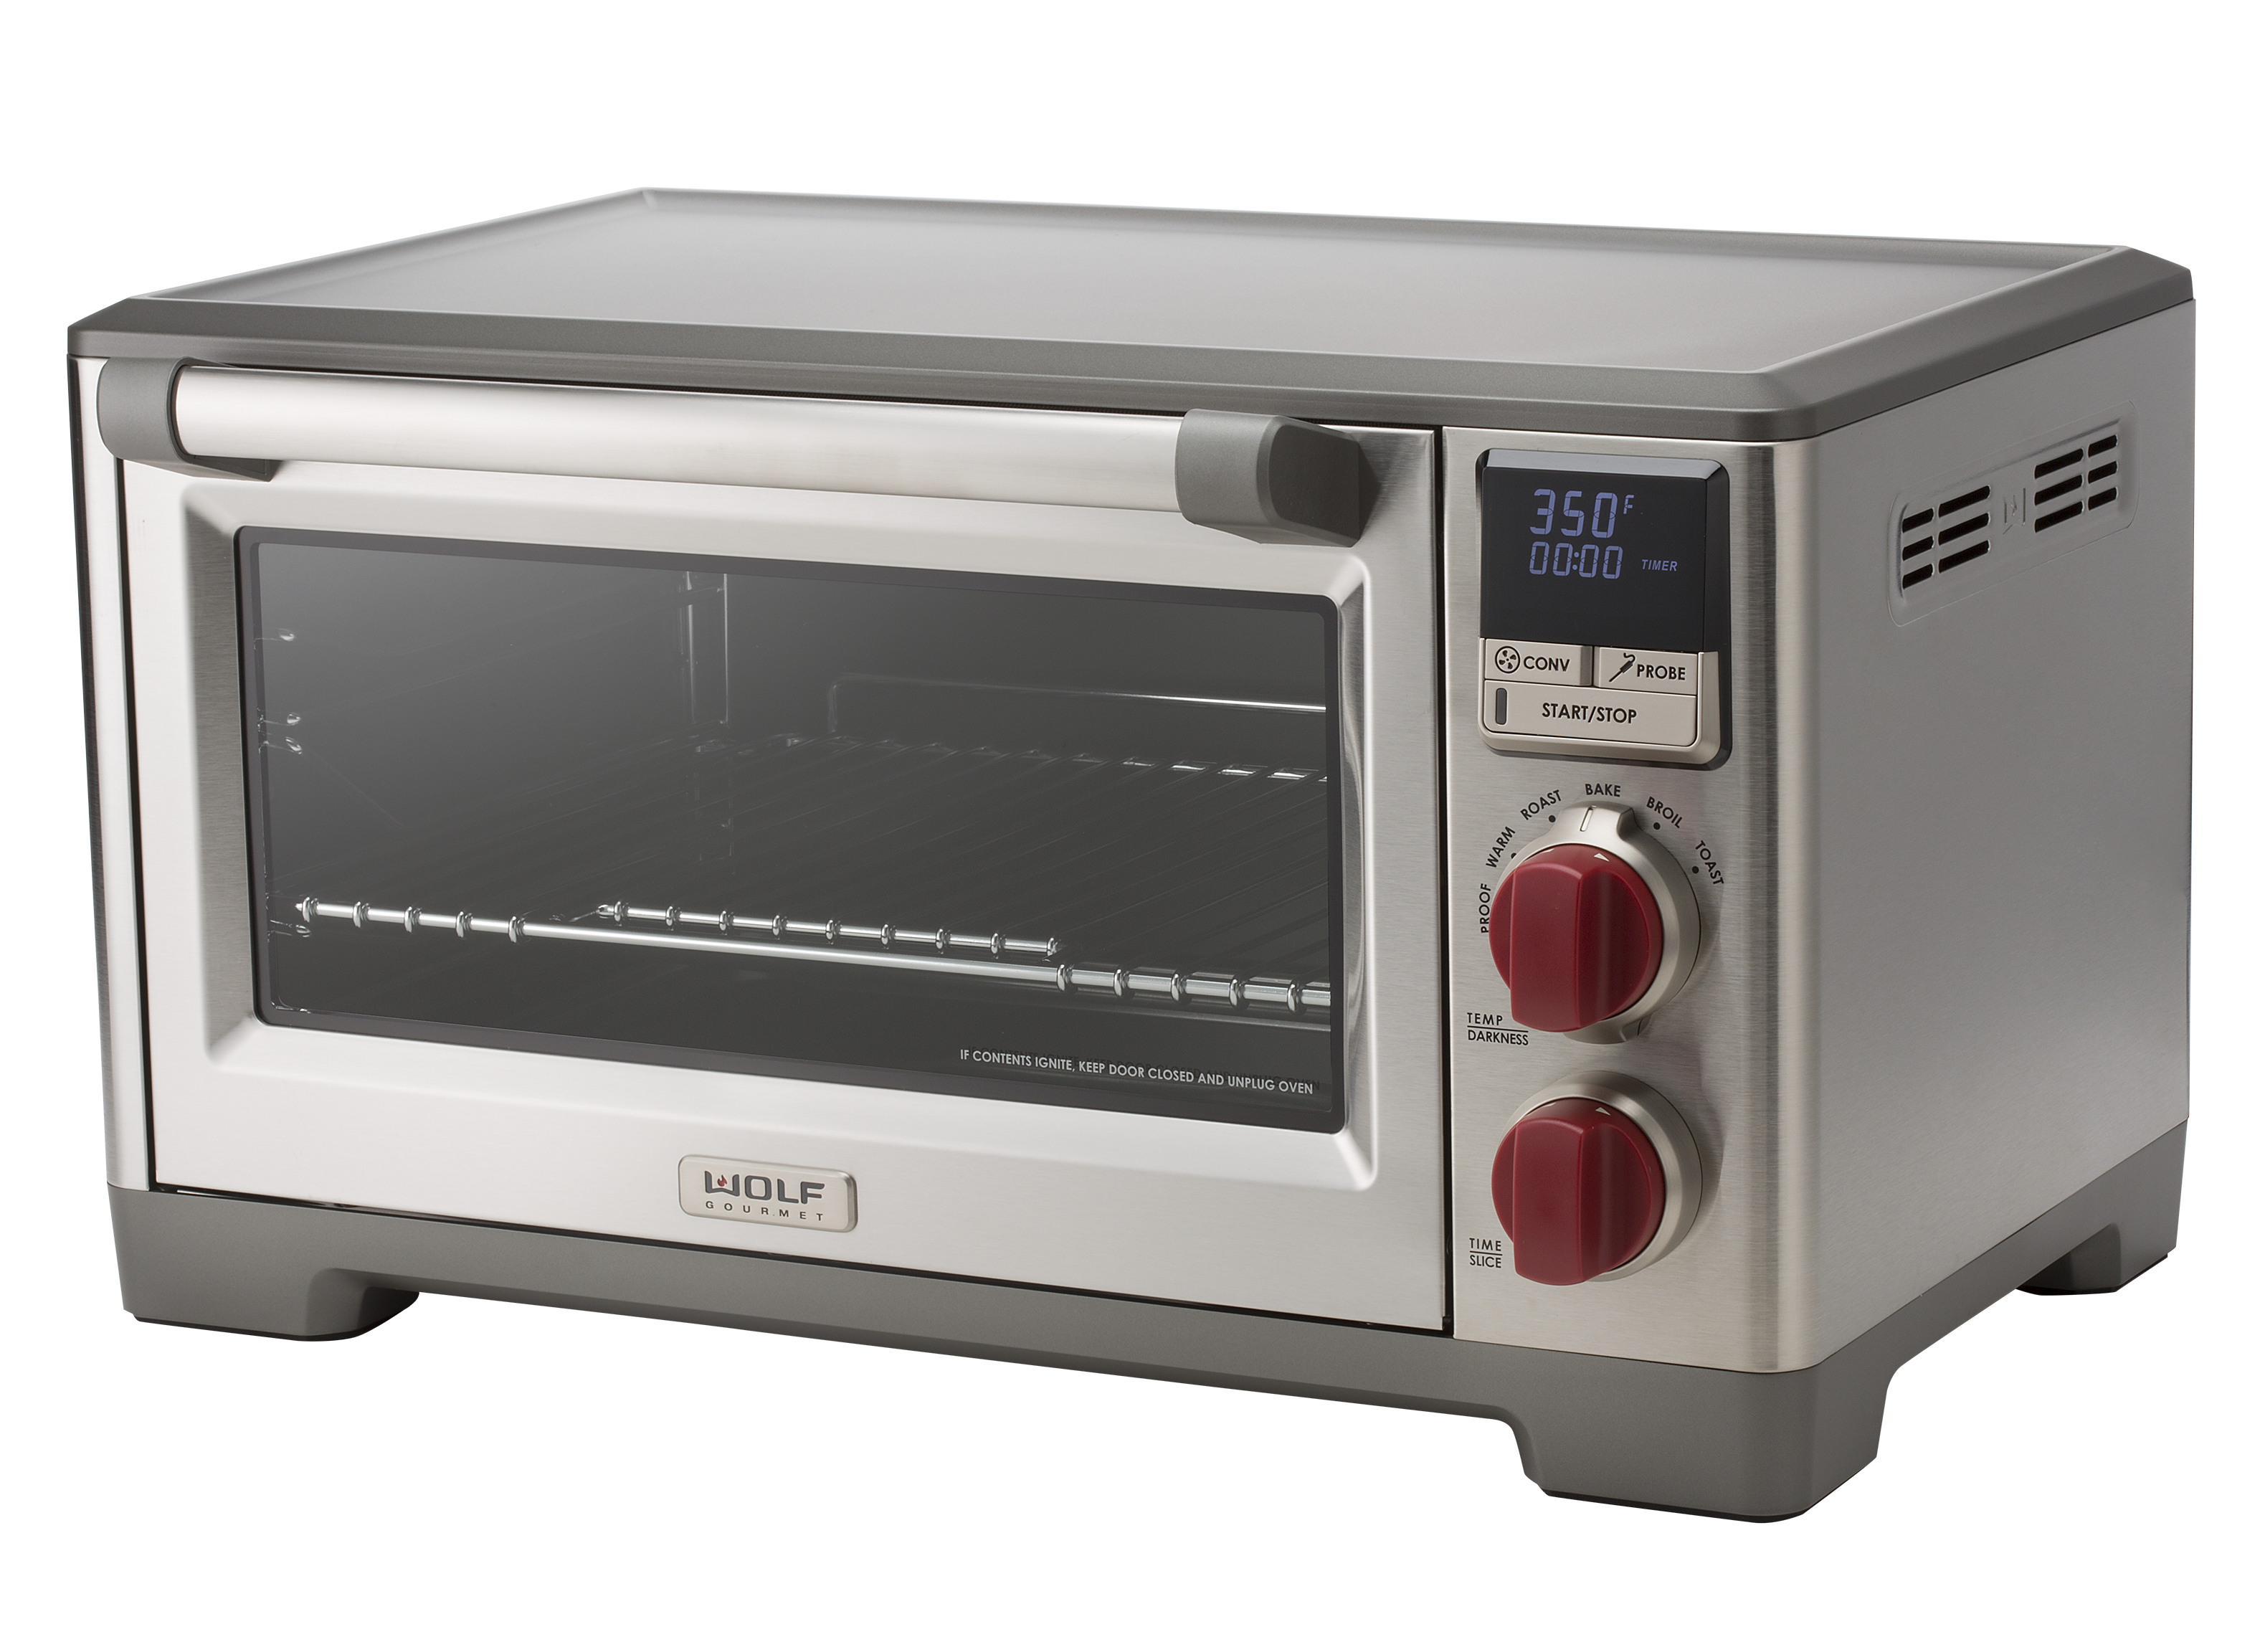 https://crdms.images.consumerreports.org/prod/products/cr/models/384471-toasterstoasterovens-wolf-gourmetcountertopwgco100s.png